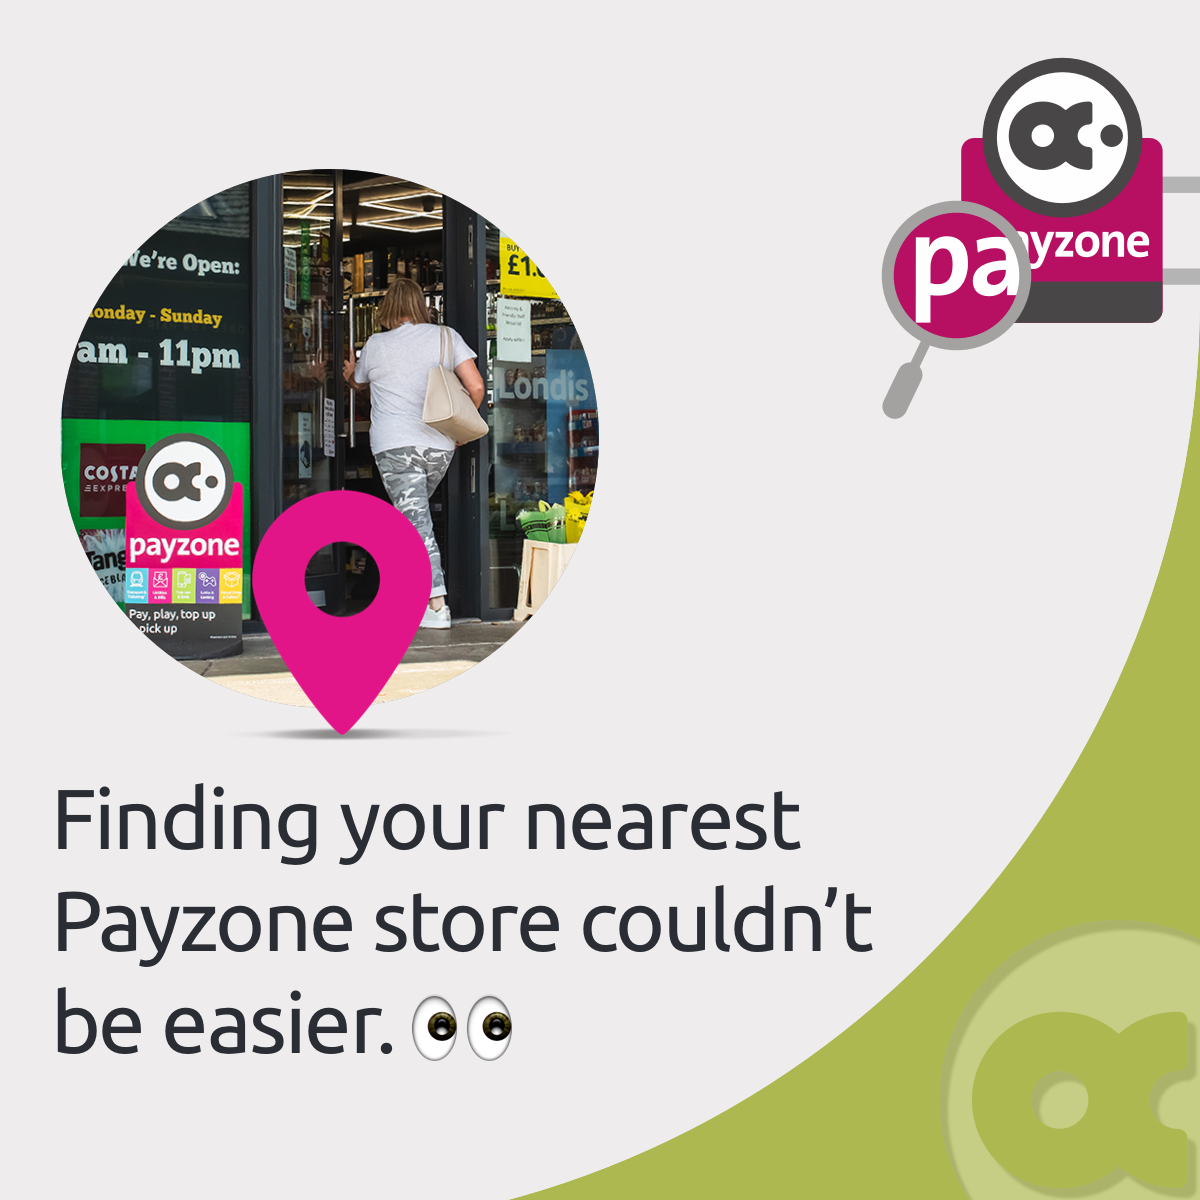 Don’t know where to go to top up or pay your bills? Find your nearest Payzone store or @PostOffice branch and pay bills effortlessly. Find out where to top up by using our store locator ⬇️ storelocator.payzone.co.uk #Payzone #BillPayments #TopUp #PostOffice